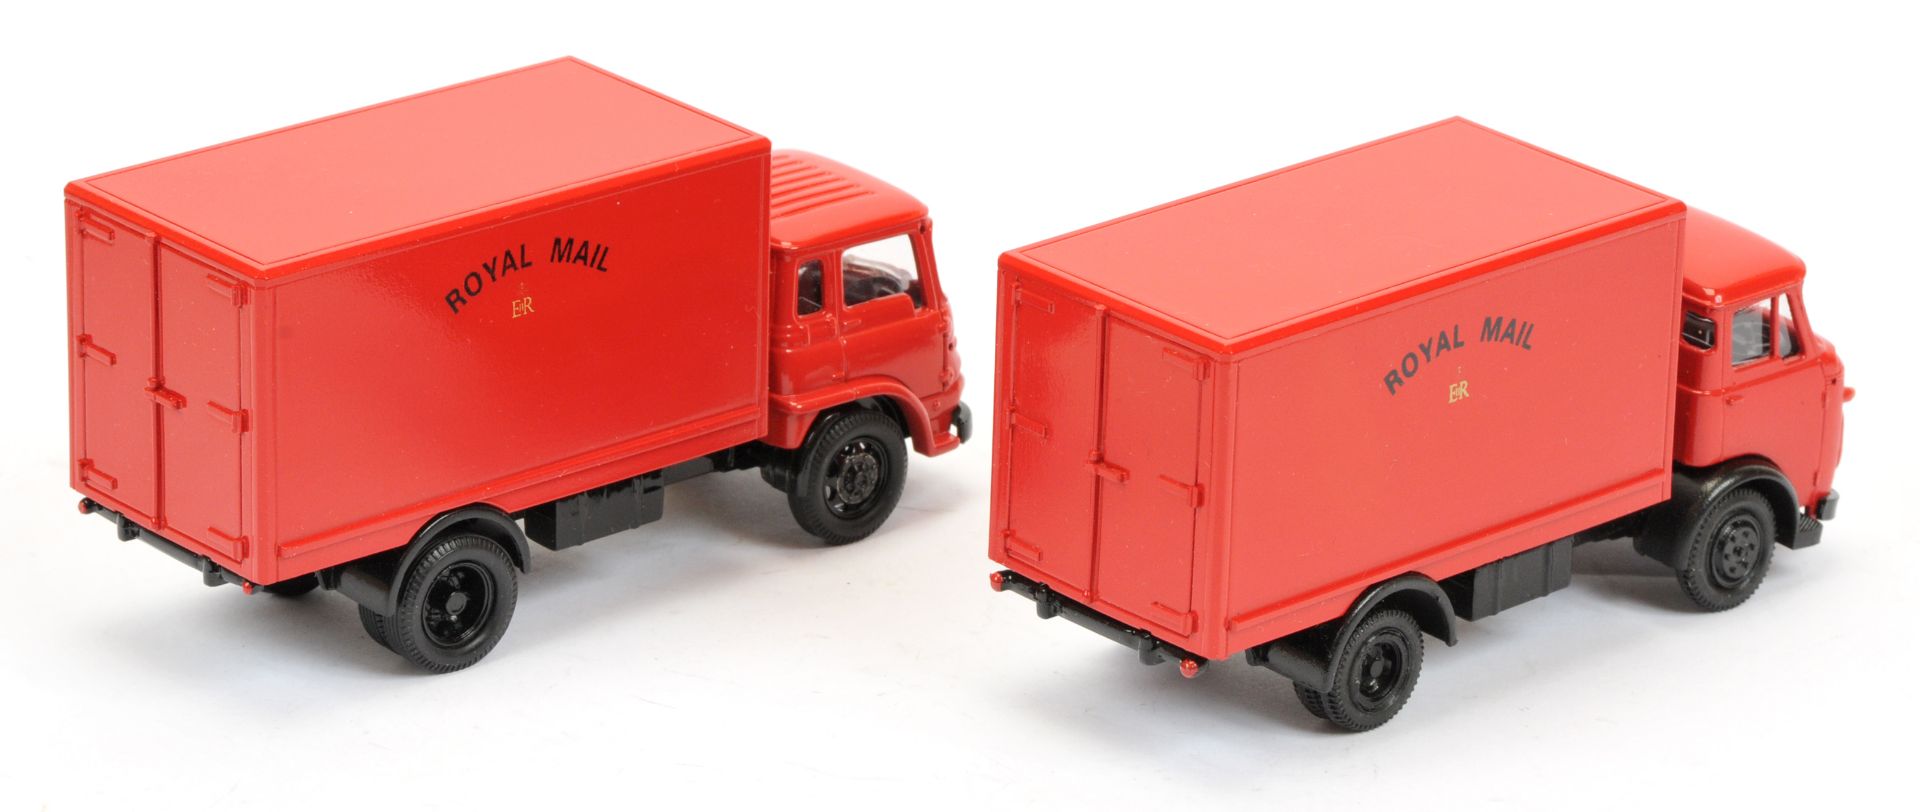 Promod Resin/White Metal A Pair (1) "Royal Mail" Karrier Gamecock - Red and (2) "Royal Mail" Bedf... - Image 2 of 2